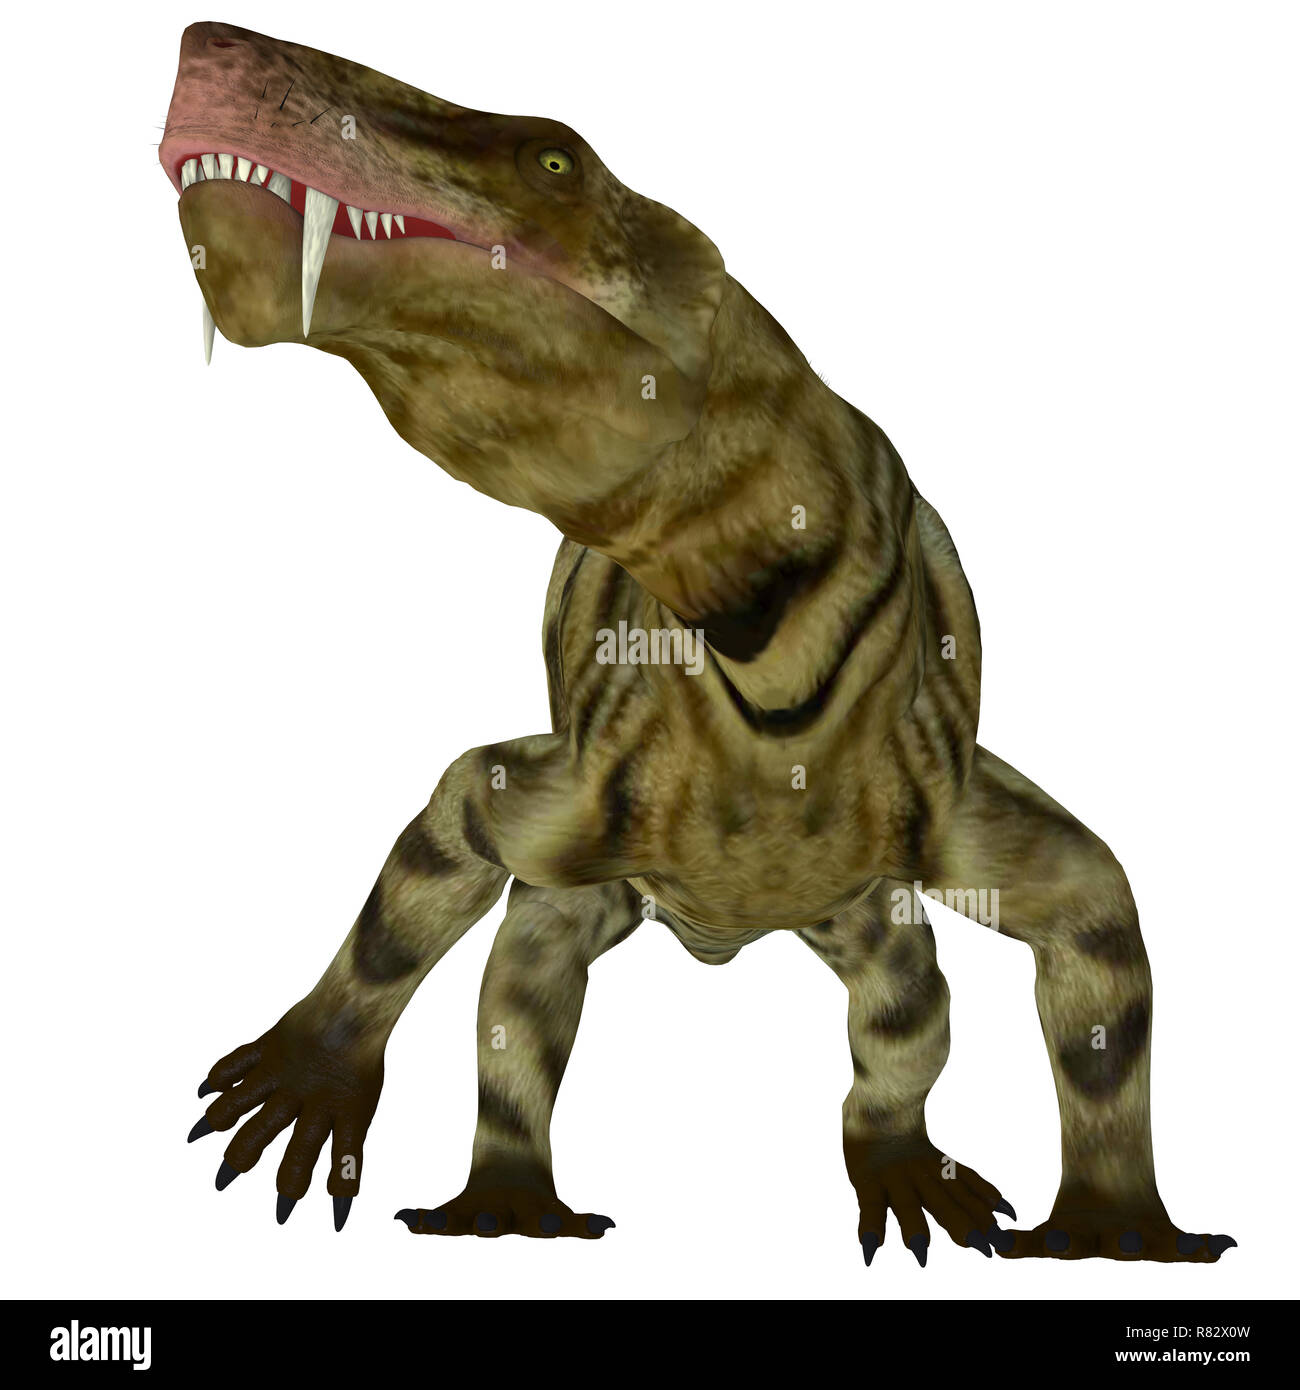 Inostrancevia Dinosaur on White - Inostrancevia was a carnivorous cat-like dinosaur that lived in Russia during the Permian Period. Stock Photo